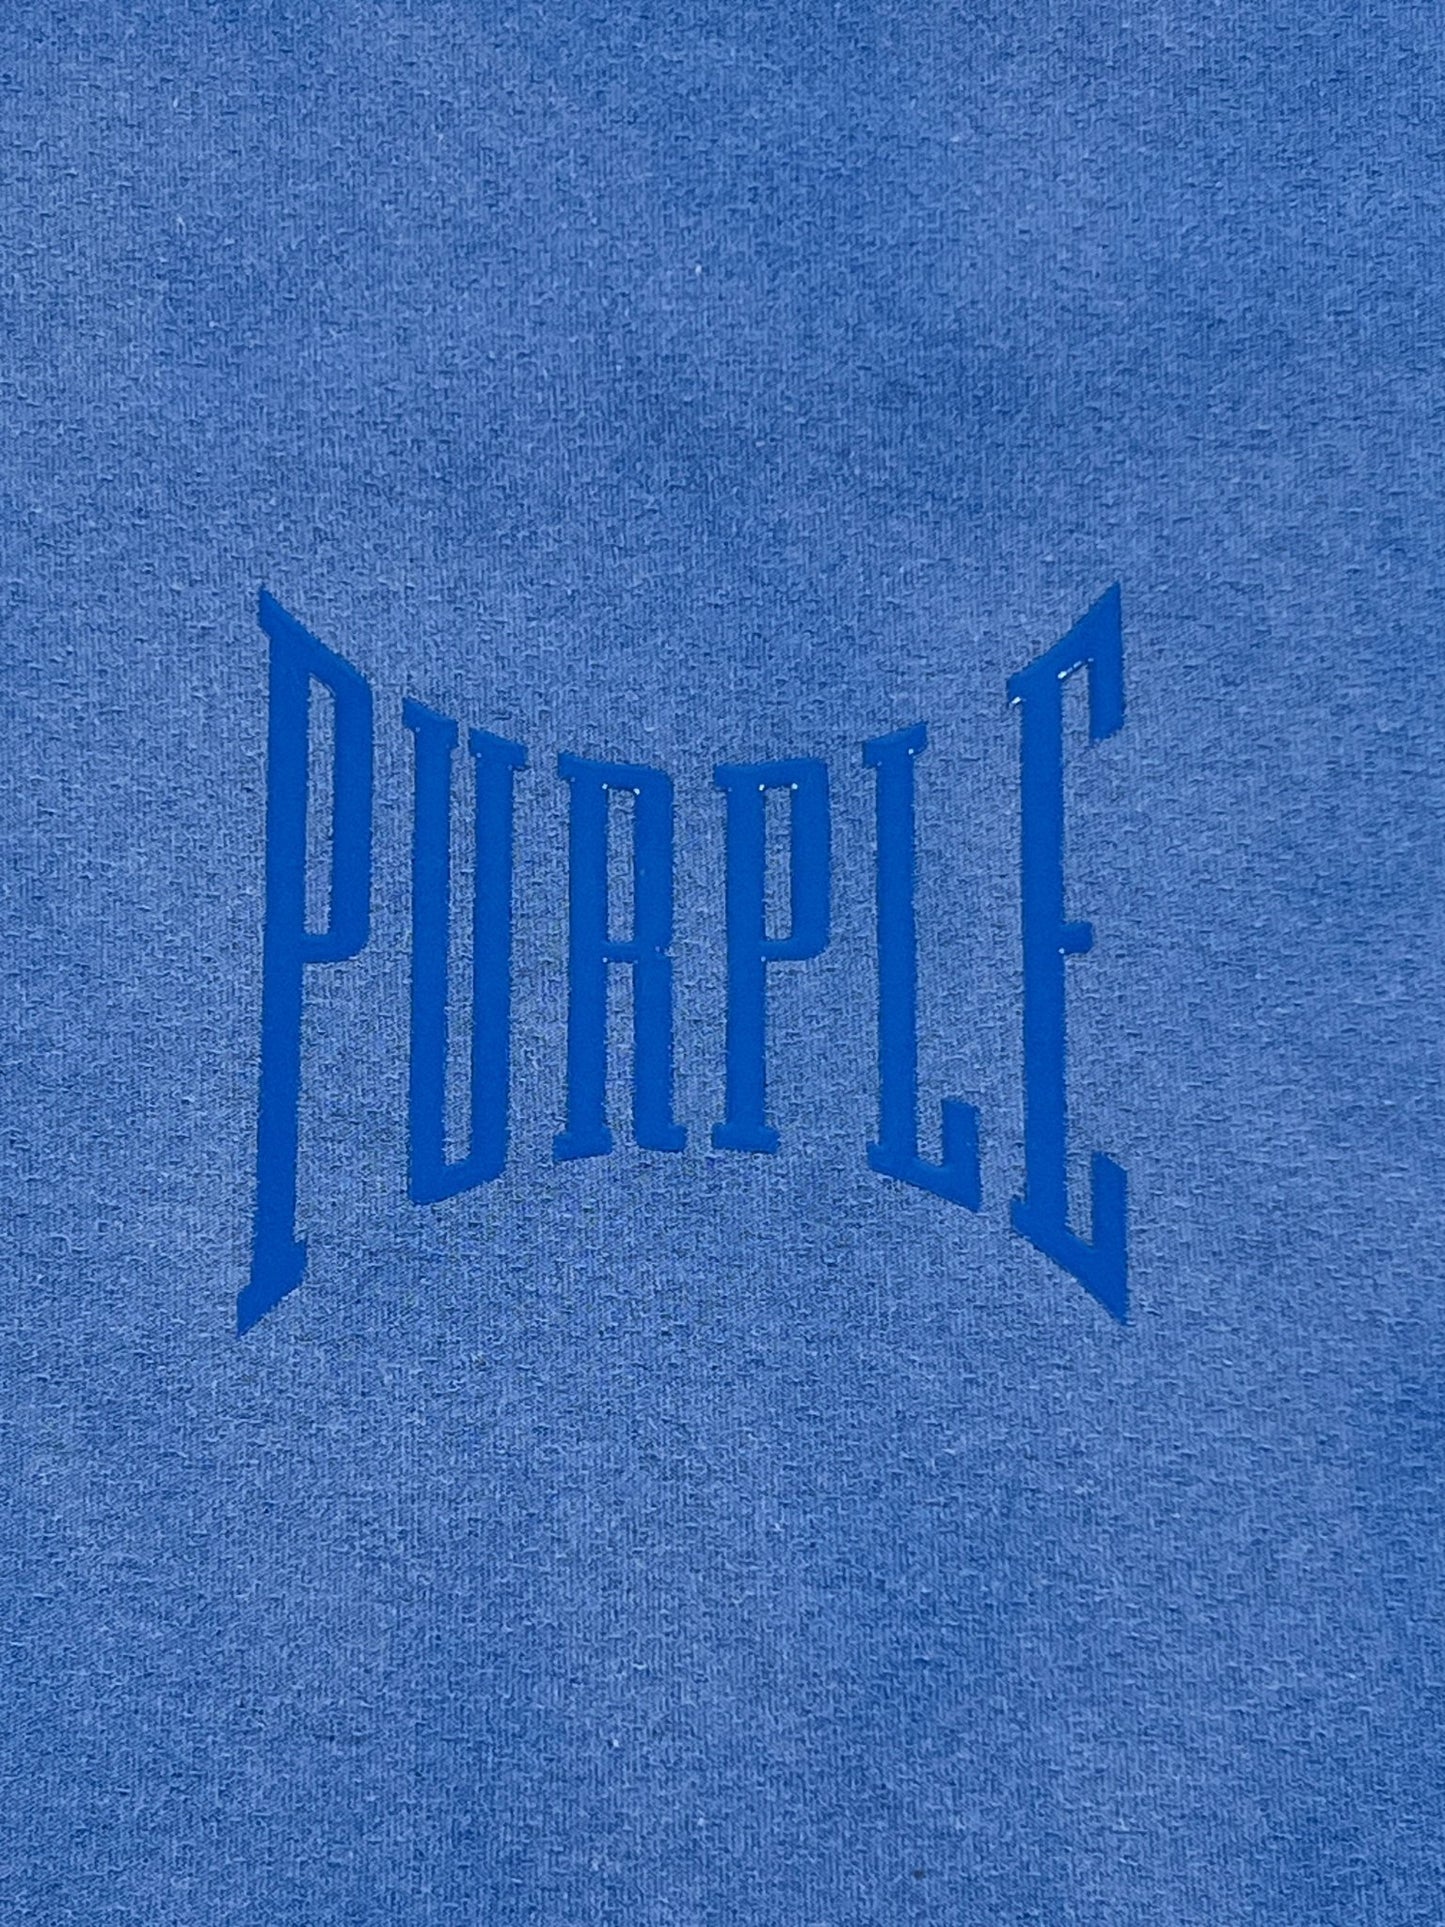 A cotton blue sweatshirt with the word "PURPLE BRAND P101-JUCB TEXTURED INSIDE OUT TEE BLUE" on it.